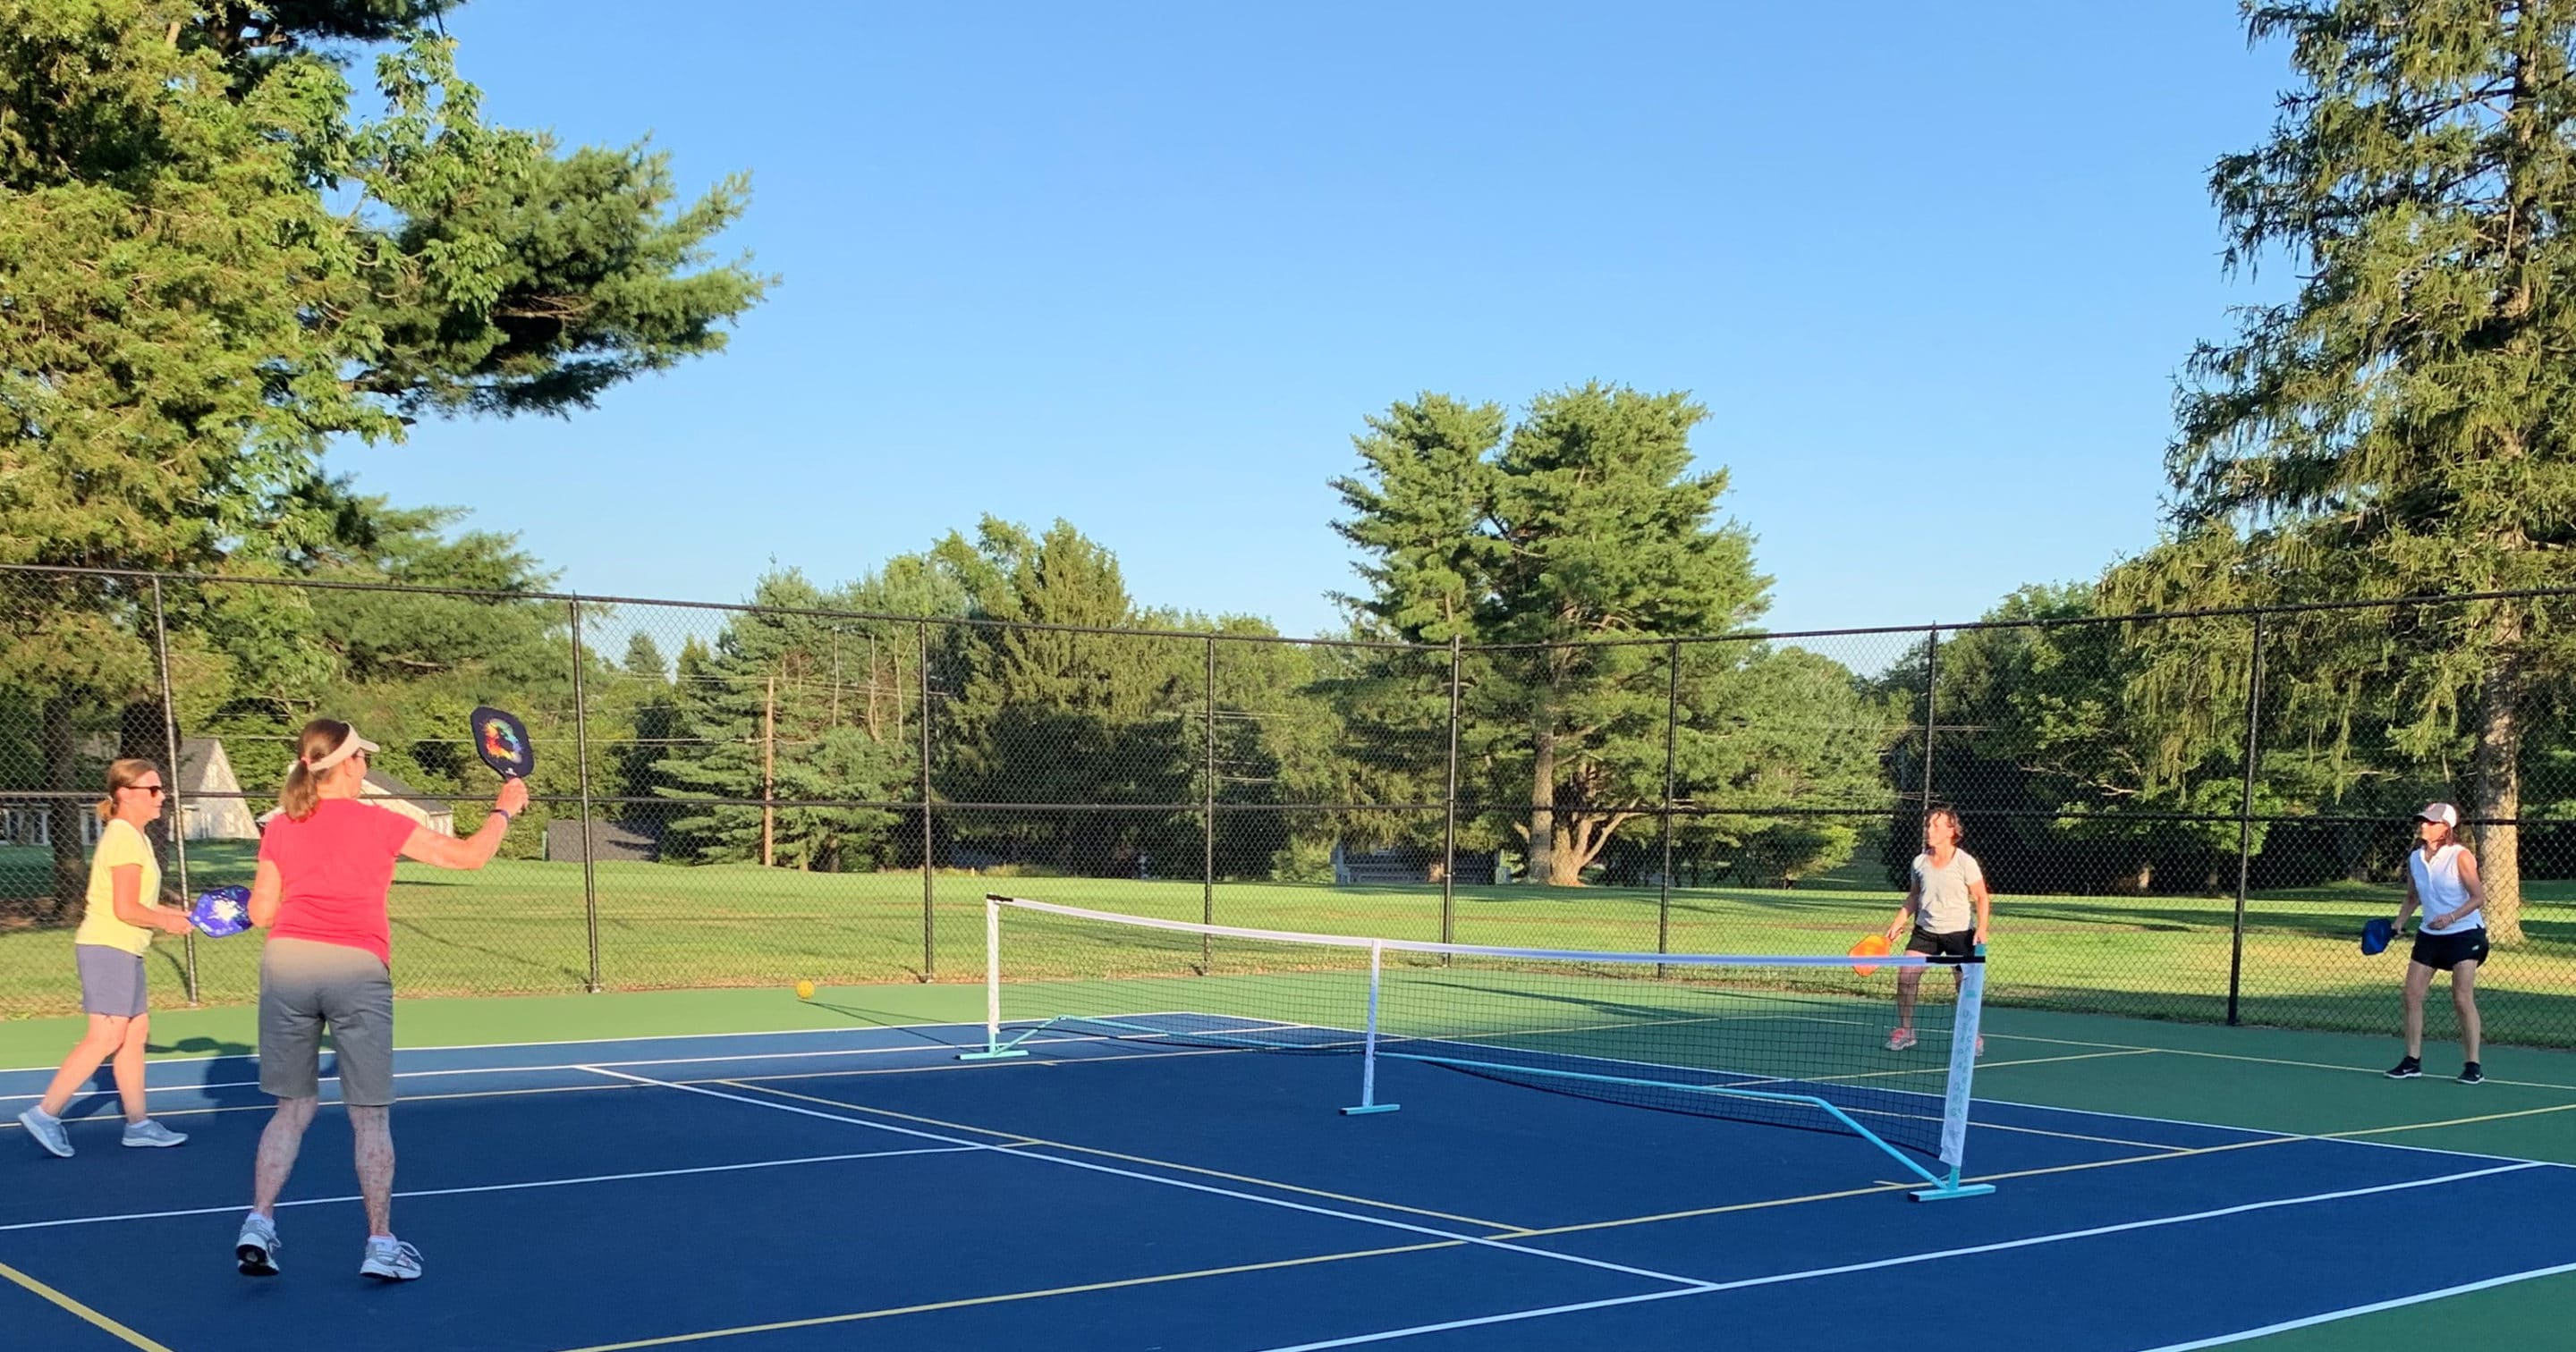 Copper Hill Pickleball Court with 4 players